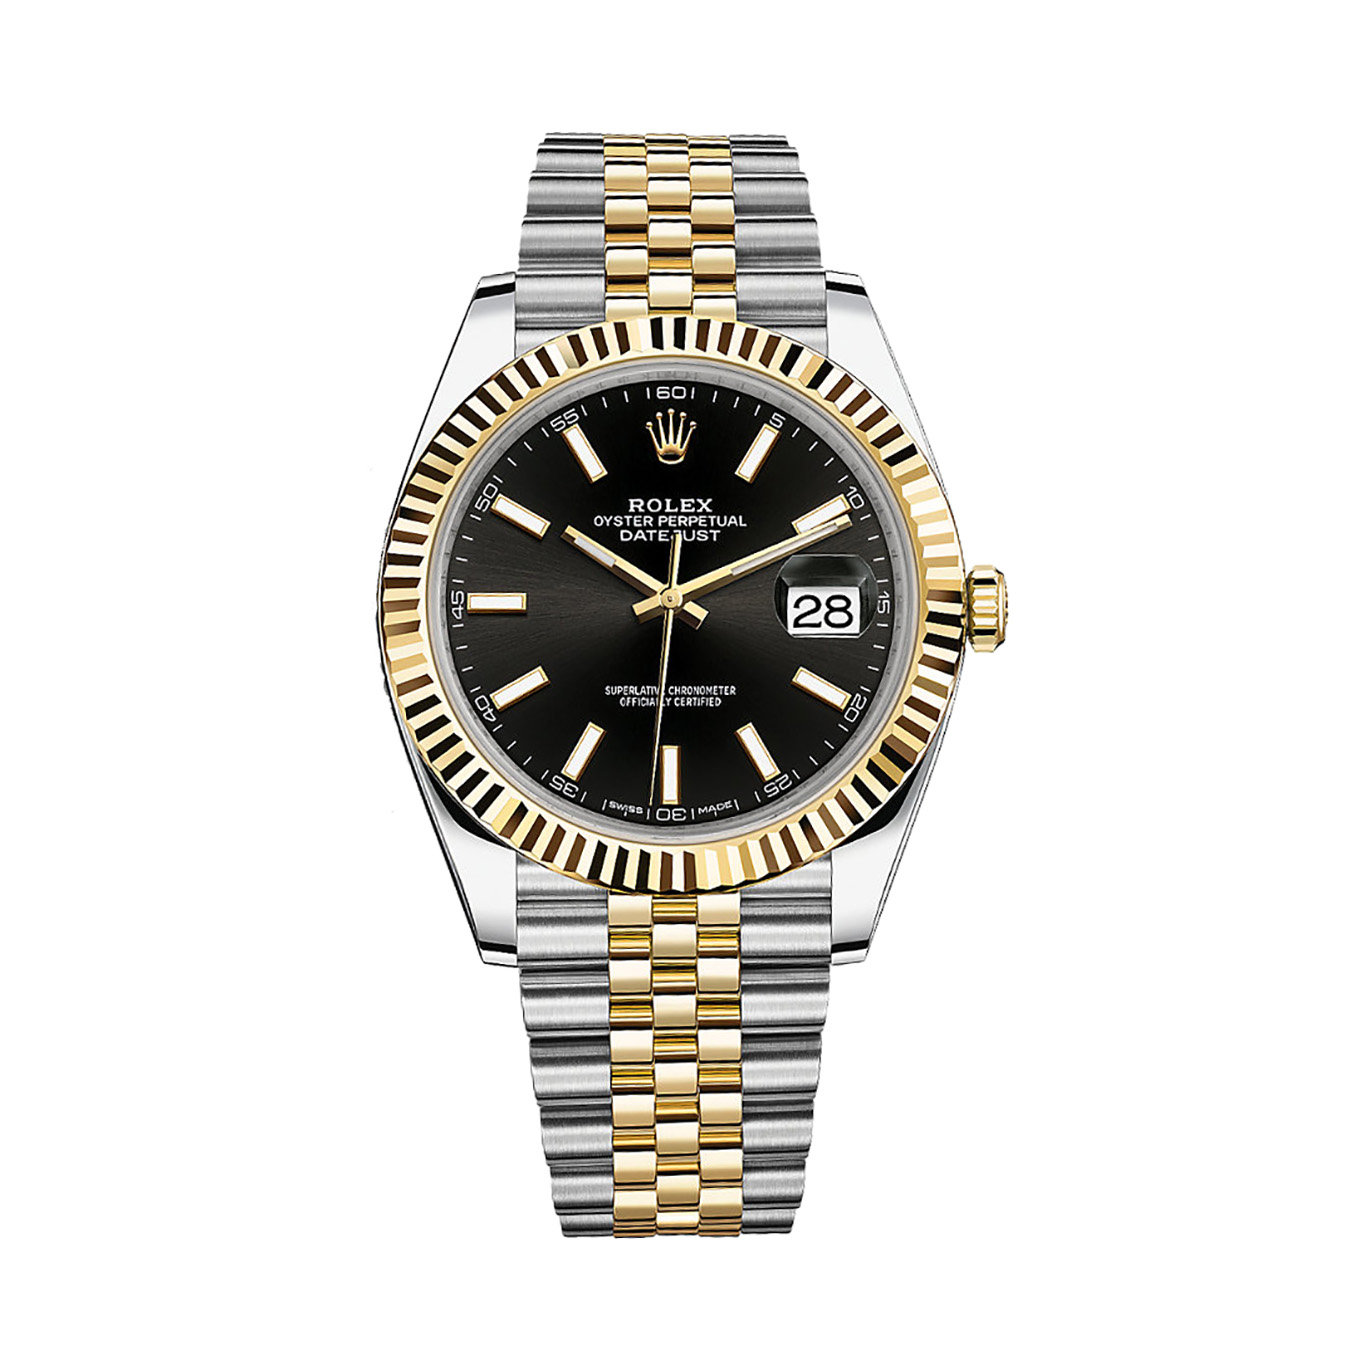 Datejust 41 126333 Gold & Stainless Steel Watch (Black)